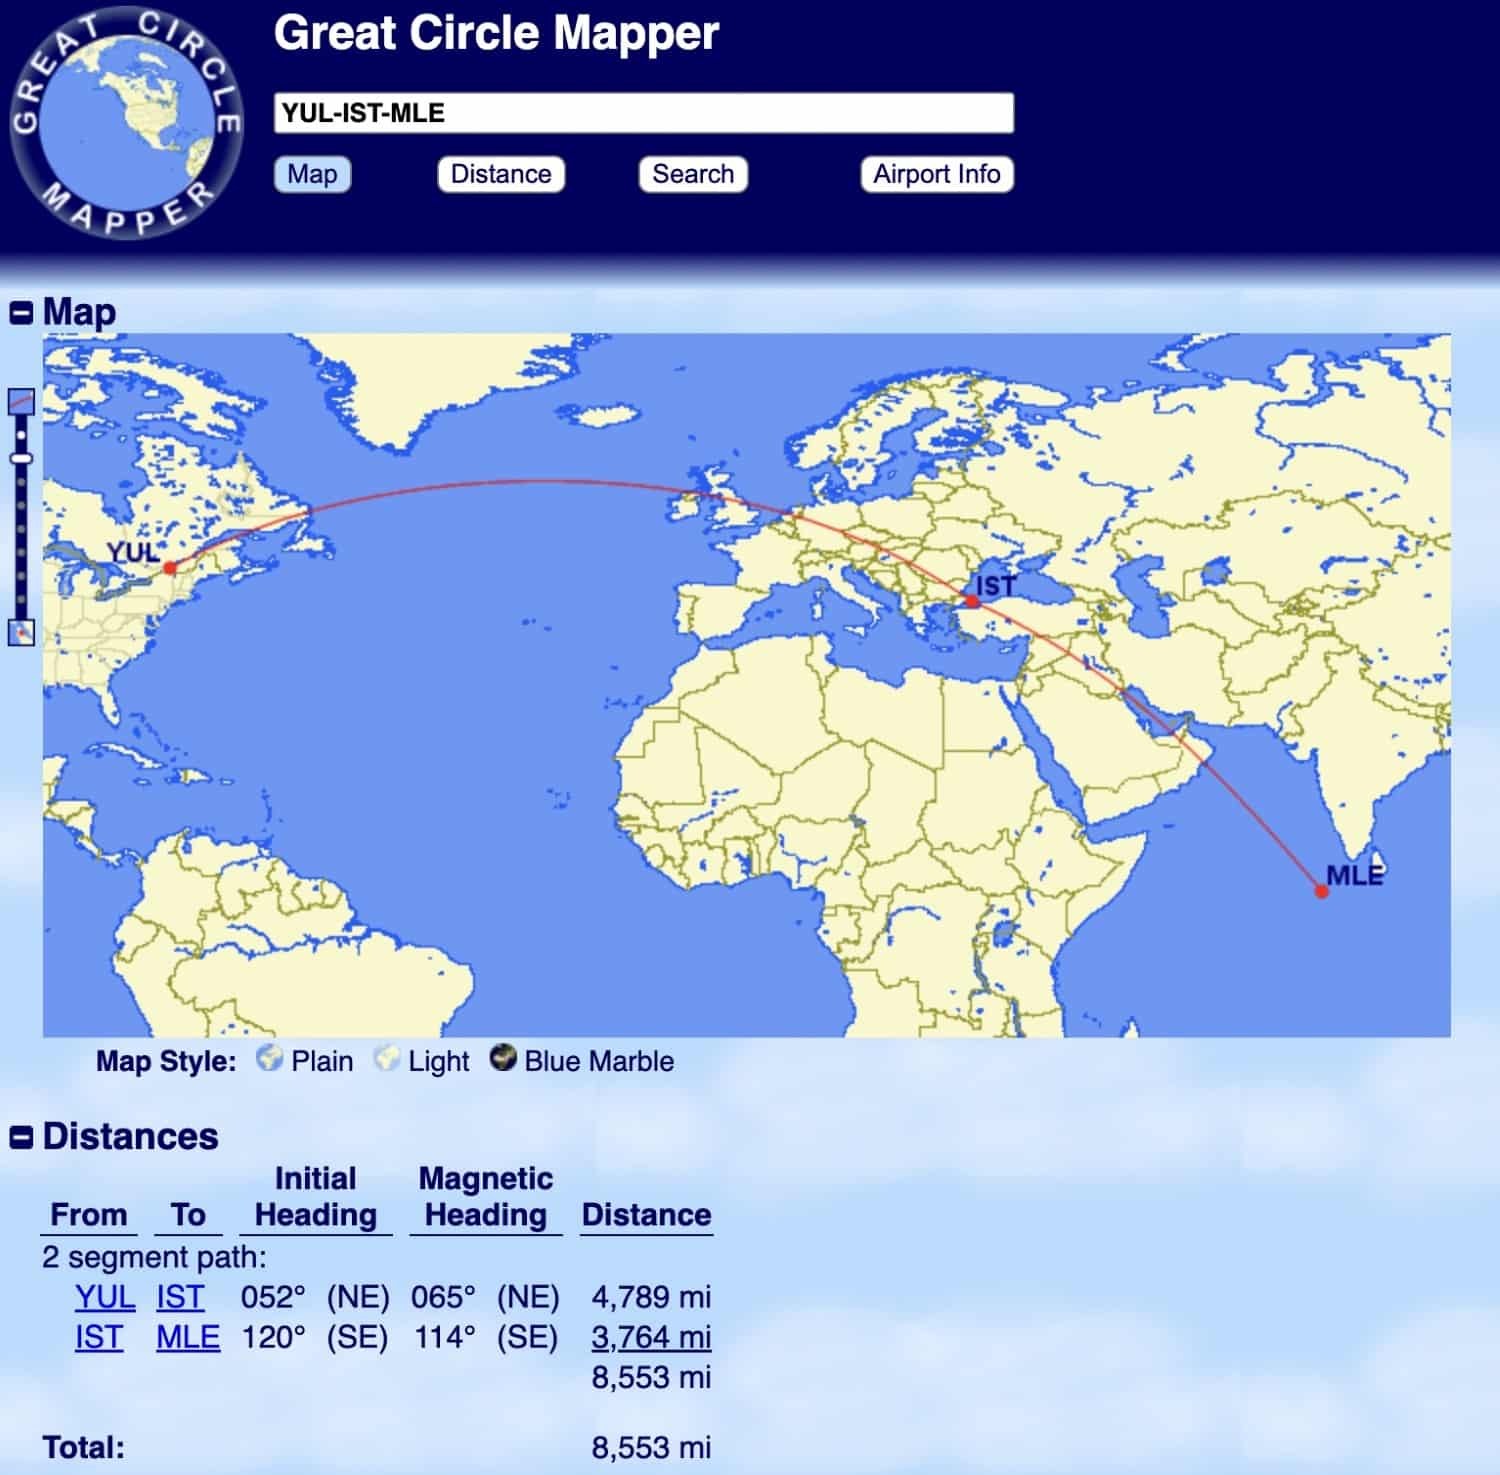 montreal to istanbul to maldives distance on great circle mapper